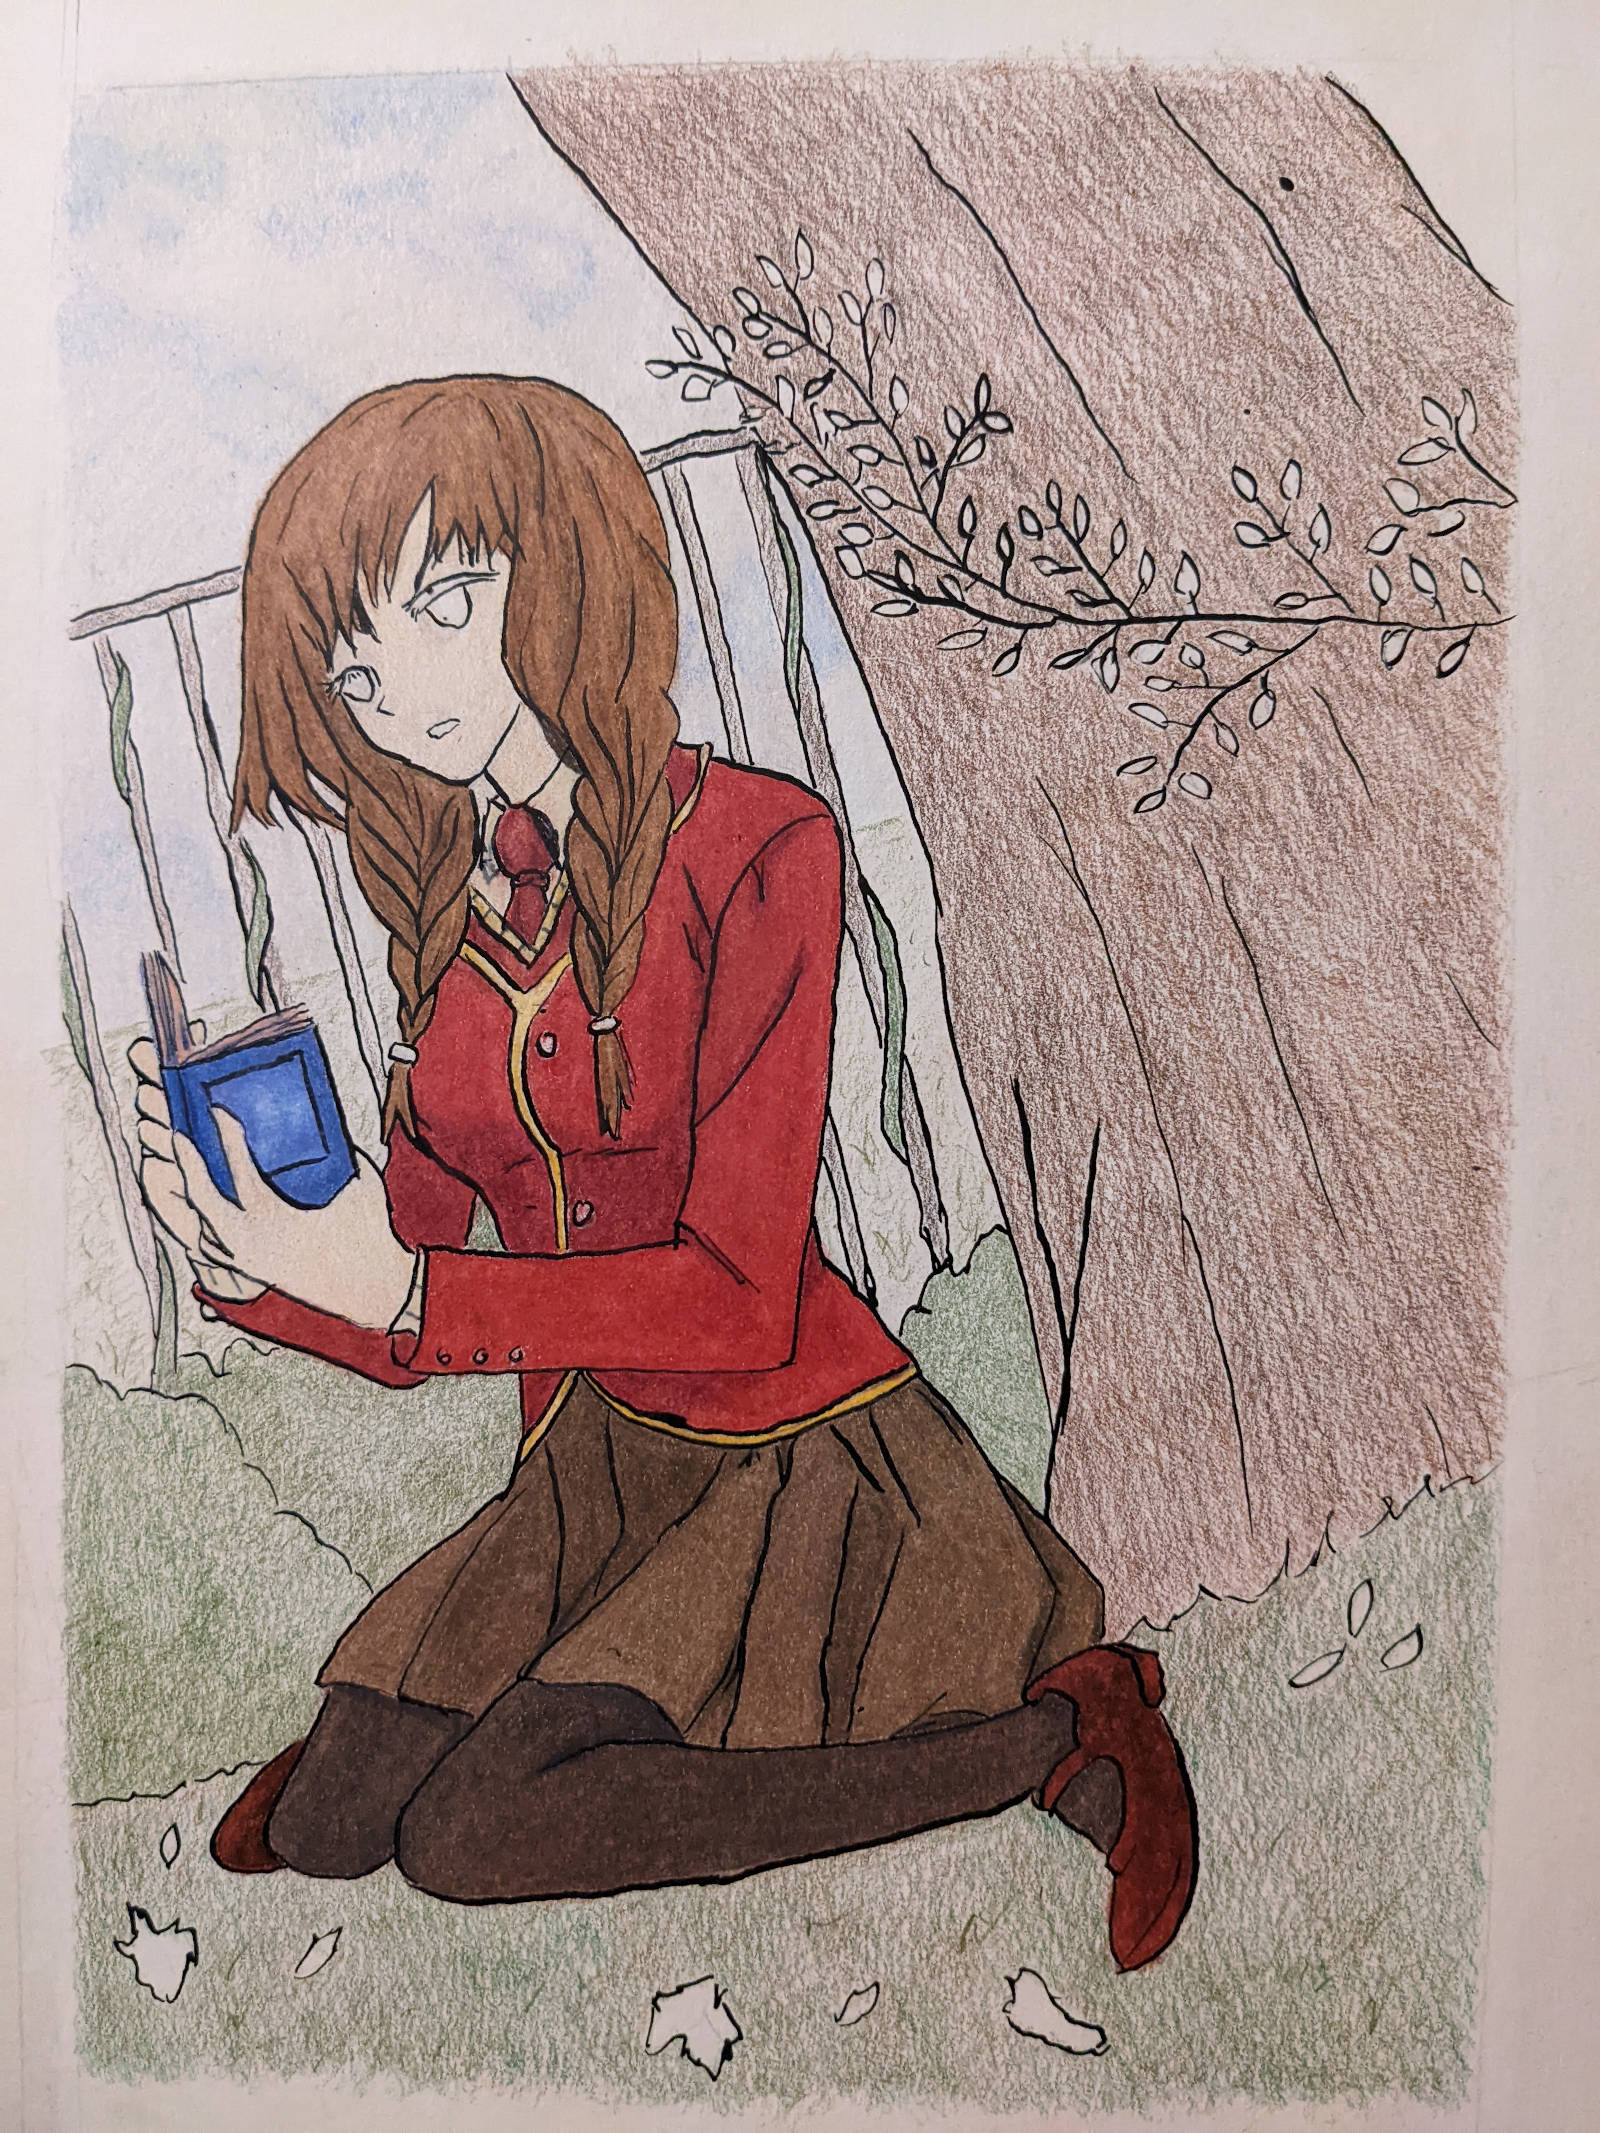 Girl with red blazer and a brown skirt sitting in front of bushes and a fence. A tree is next to her. She is reading a diary. Only the girl is fully colored.